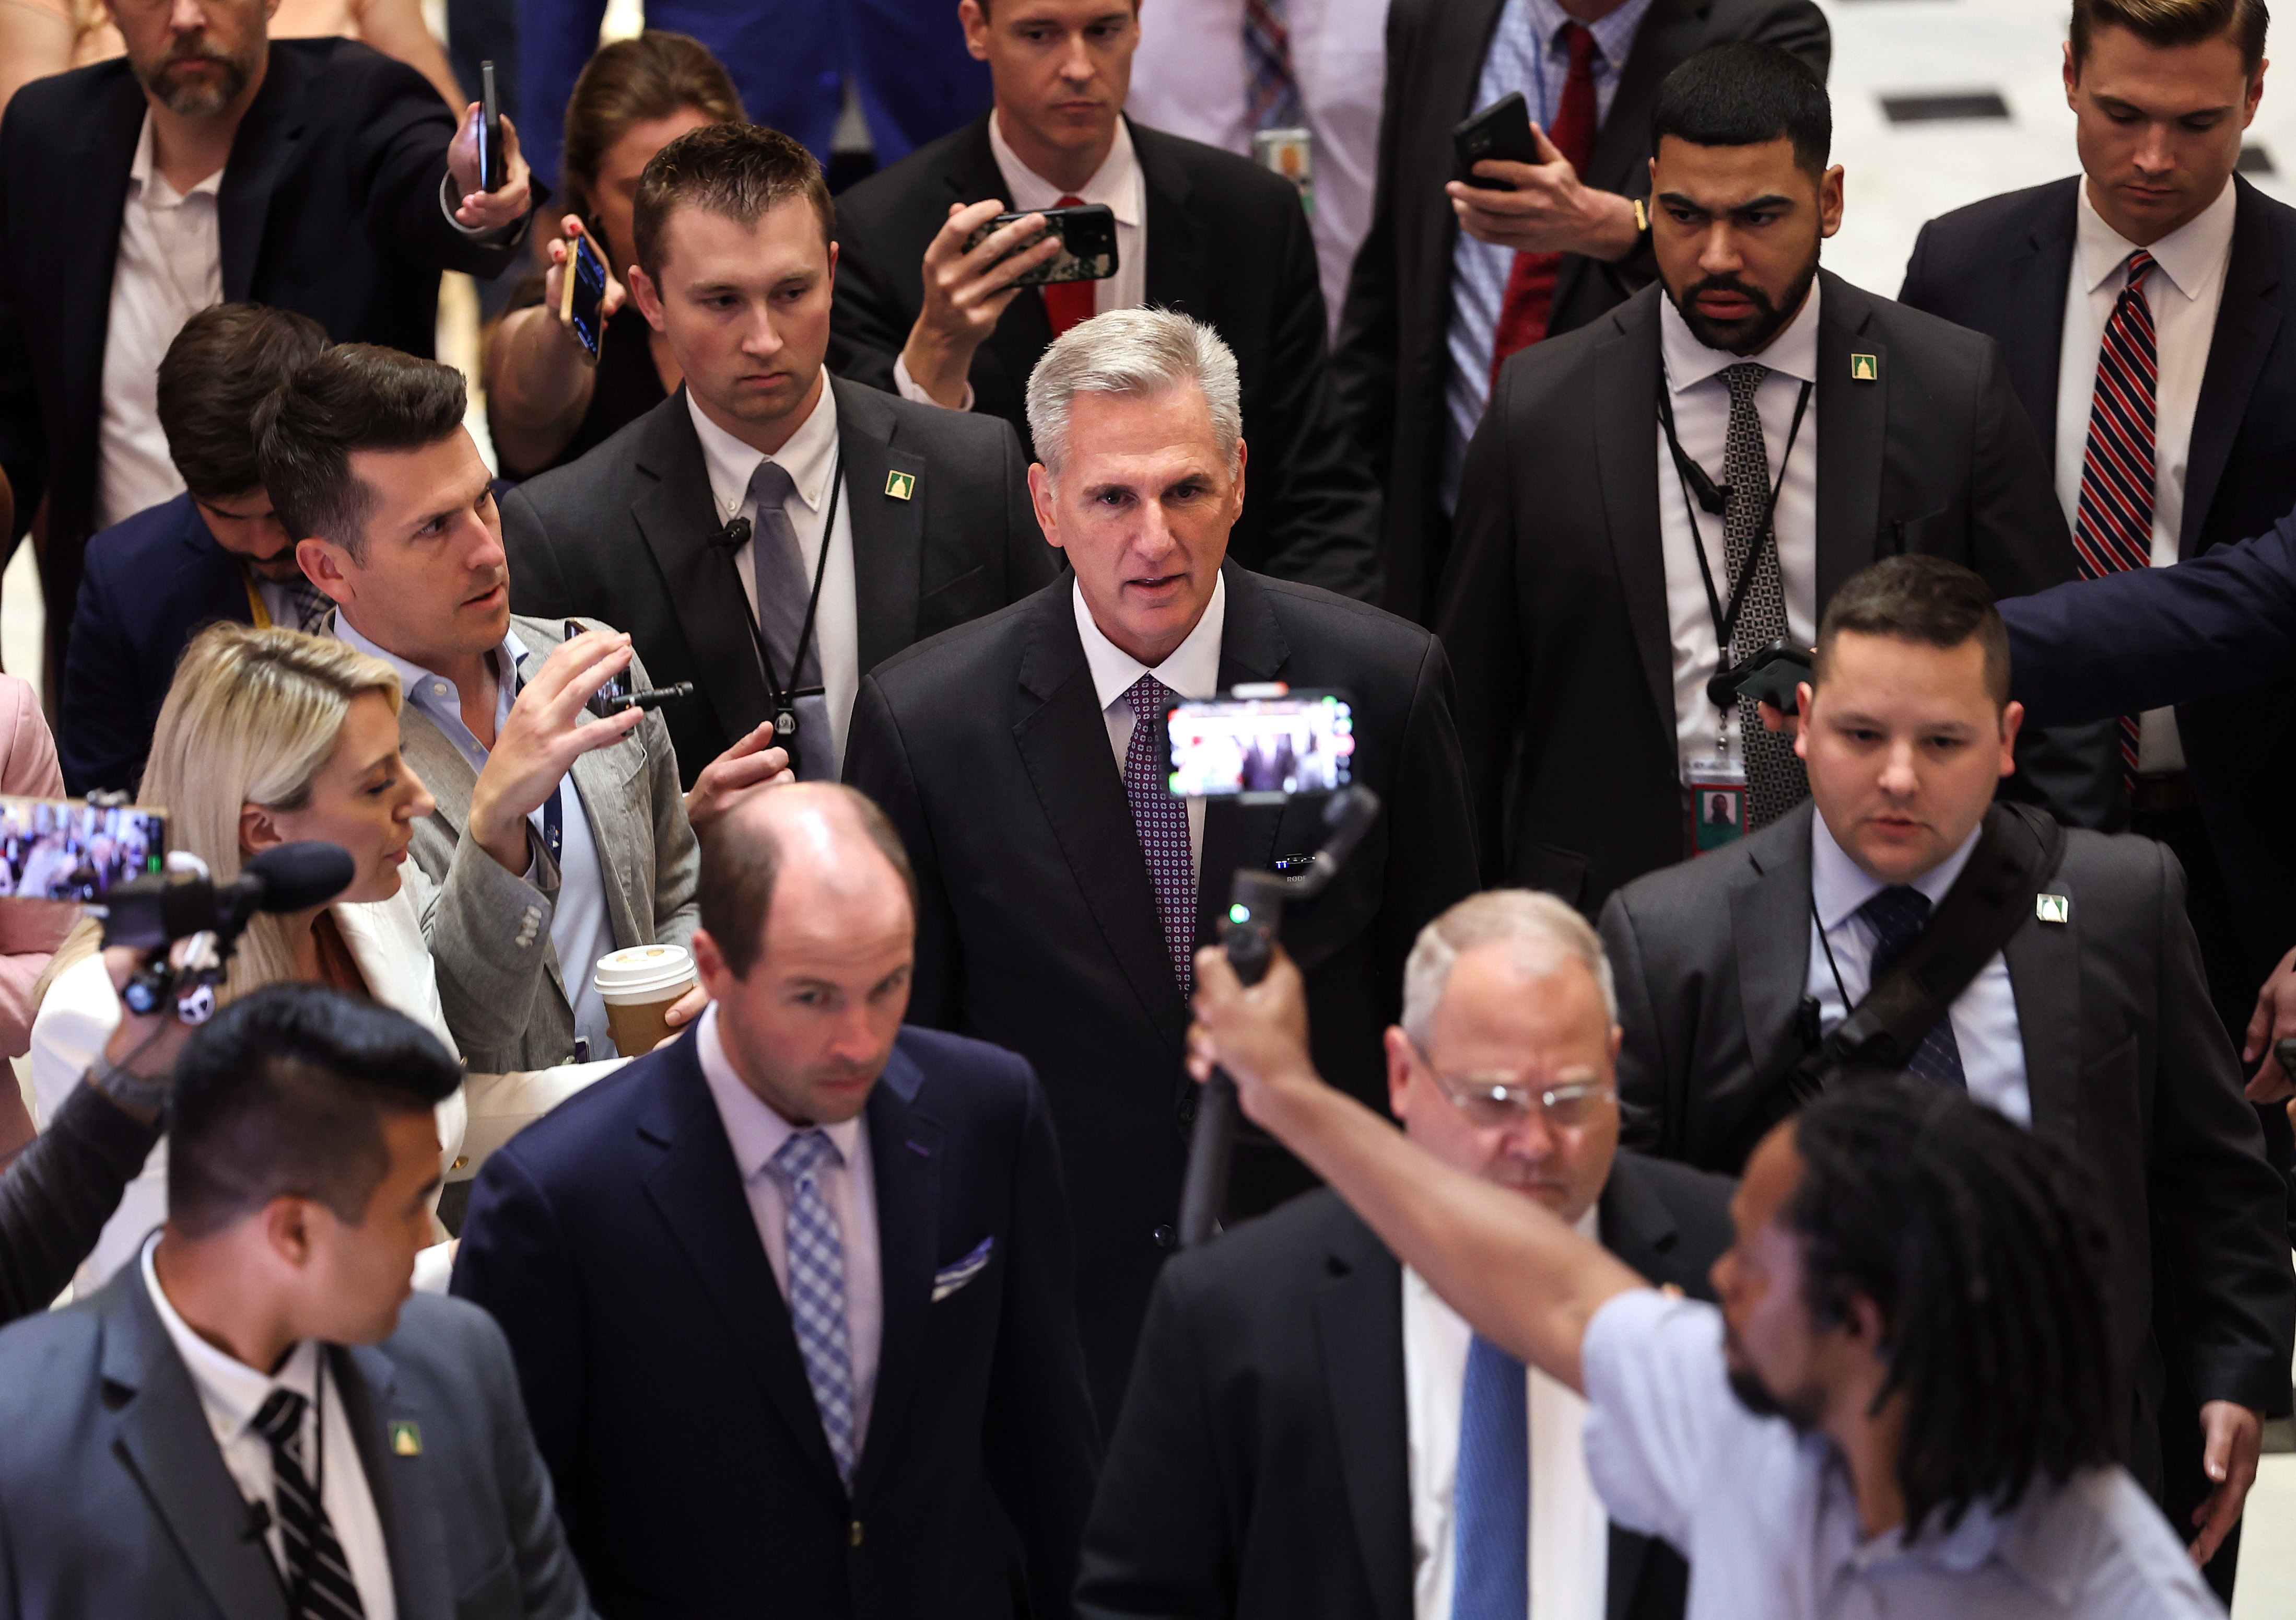 A crowd of people in suits and ties surround Kevin McCarthy, pointing microphones at him and taking videos with their cellphones.